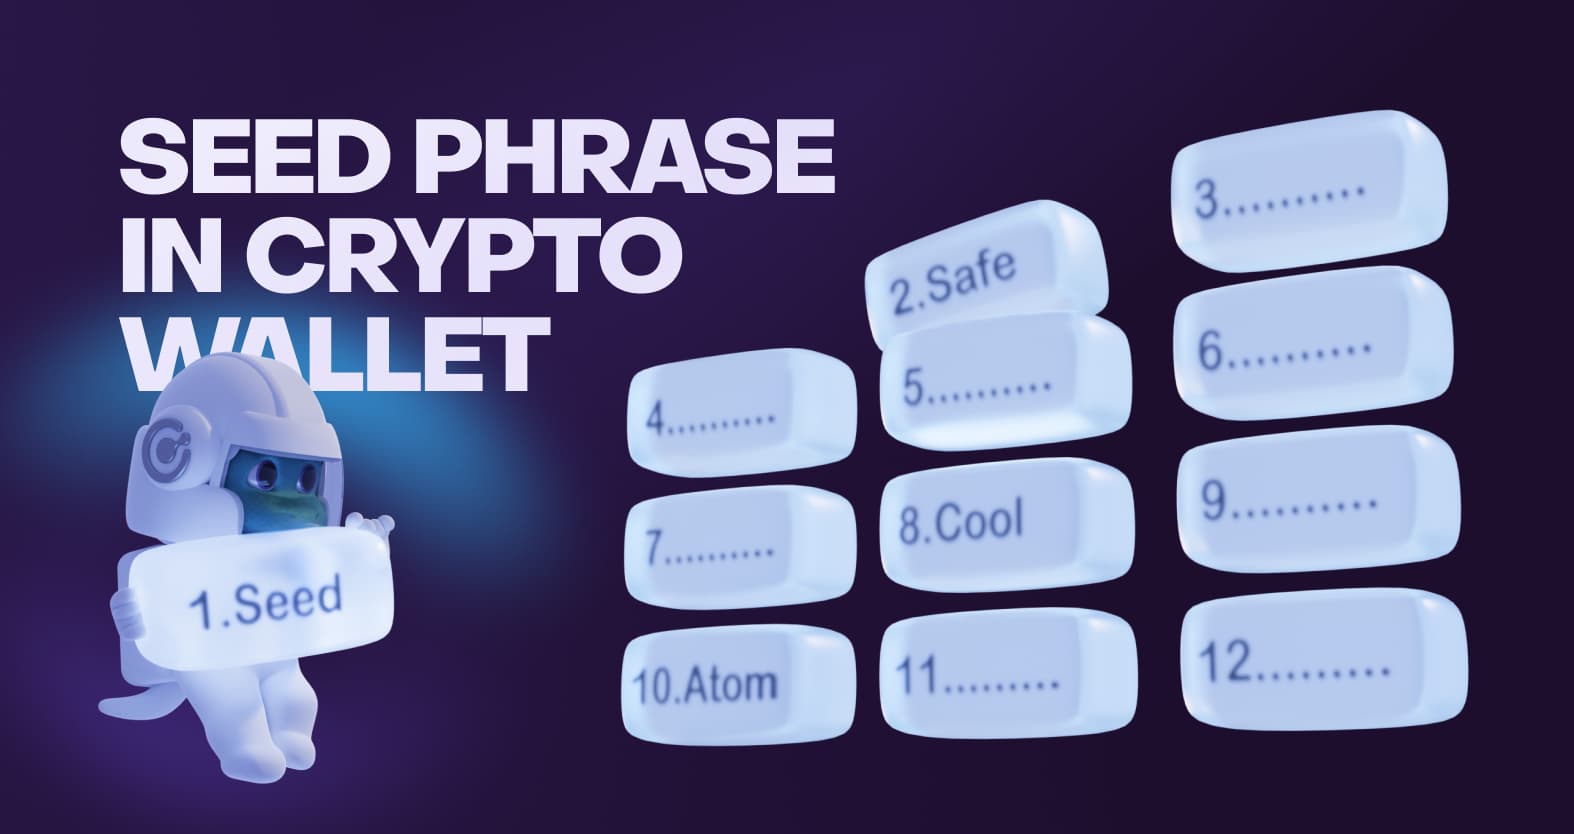 What Is a Seed Phrase in a Crypto Wallet?